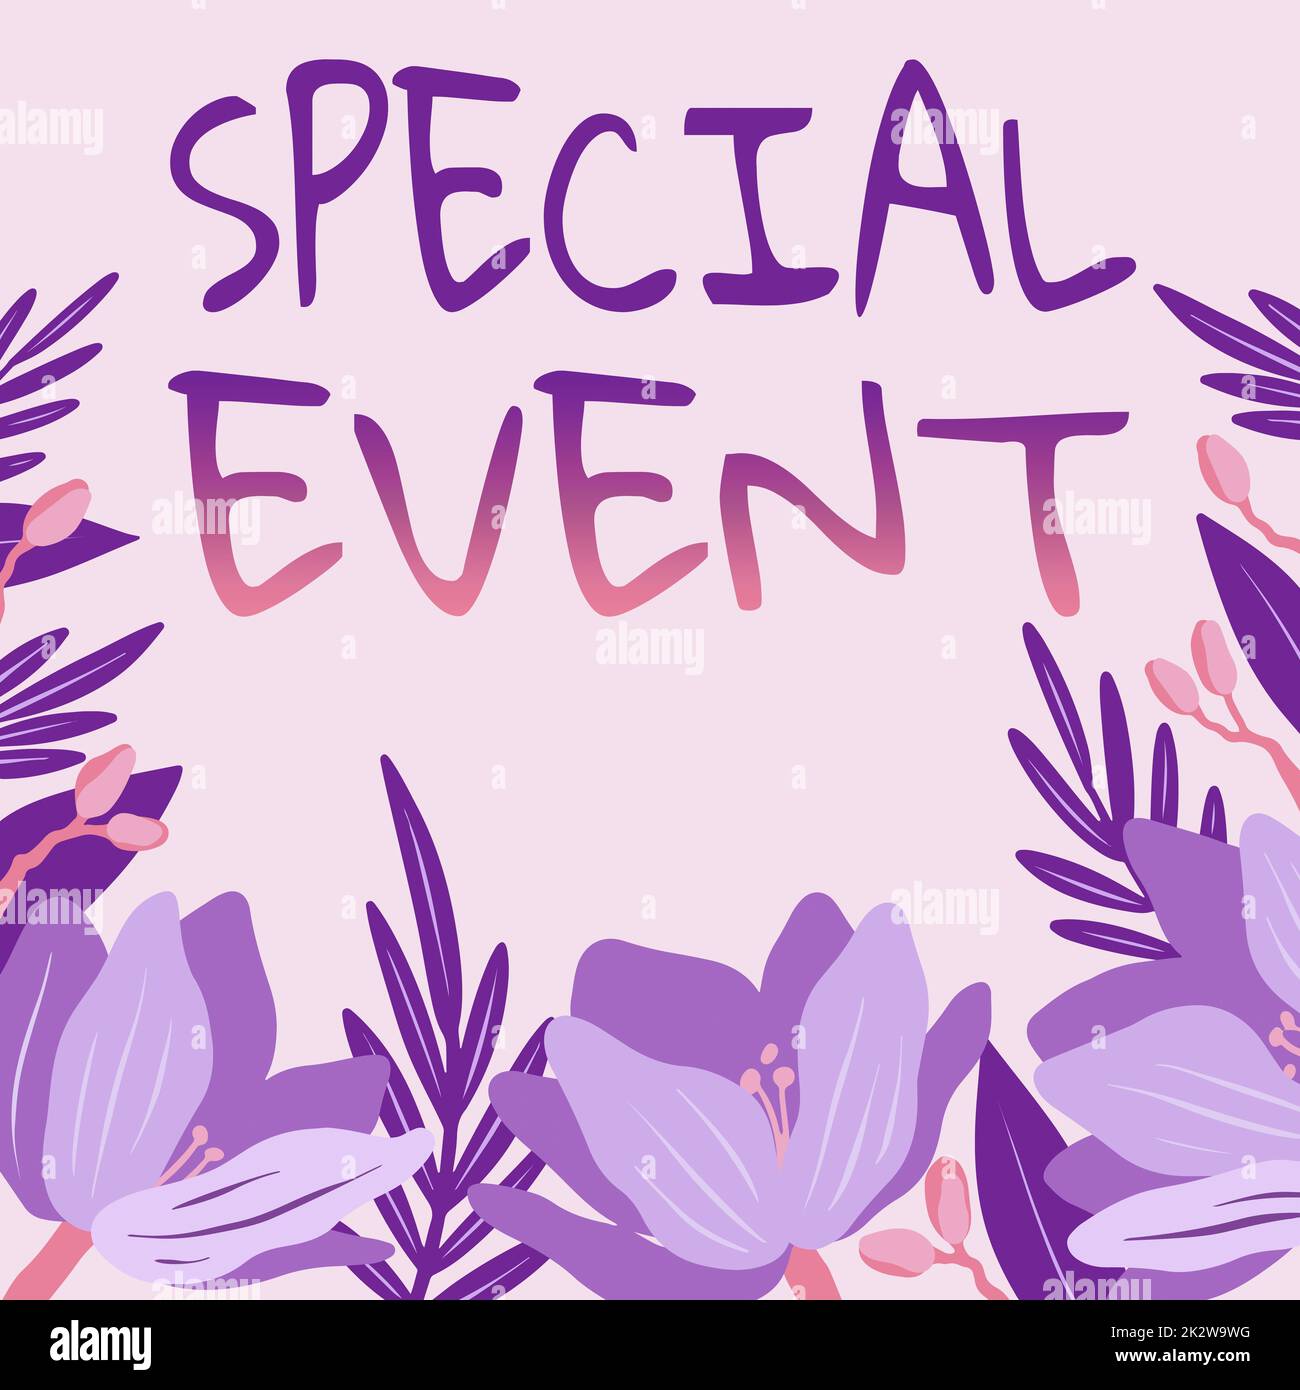 Sign displaying Special Event. Word for Function to generate money for non profit a Crowded Occassion Frame Decorated With Colorful Flowers And Foliage Arranged Harmoniously. Stock Photo